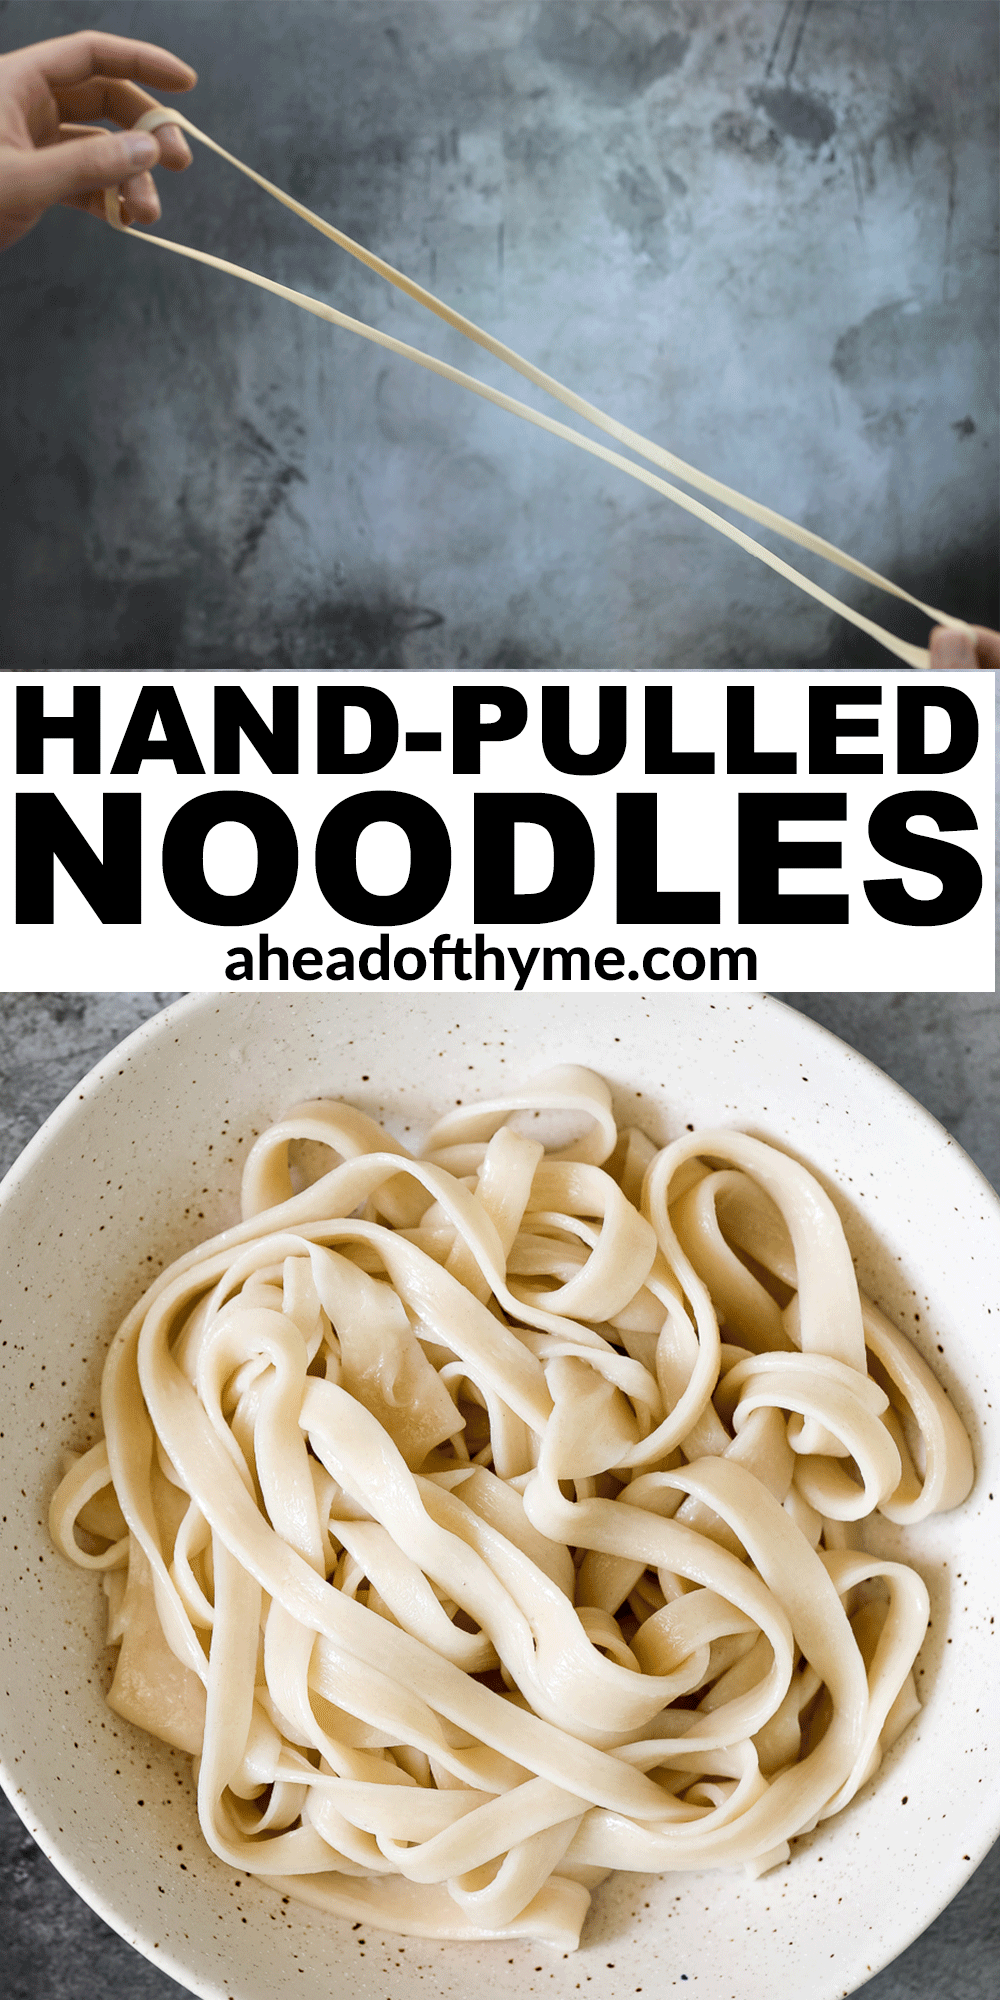 Hand-Pulled Noodles